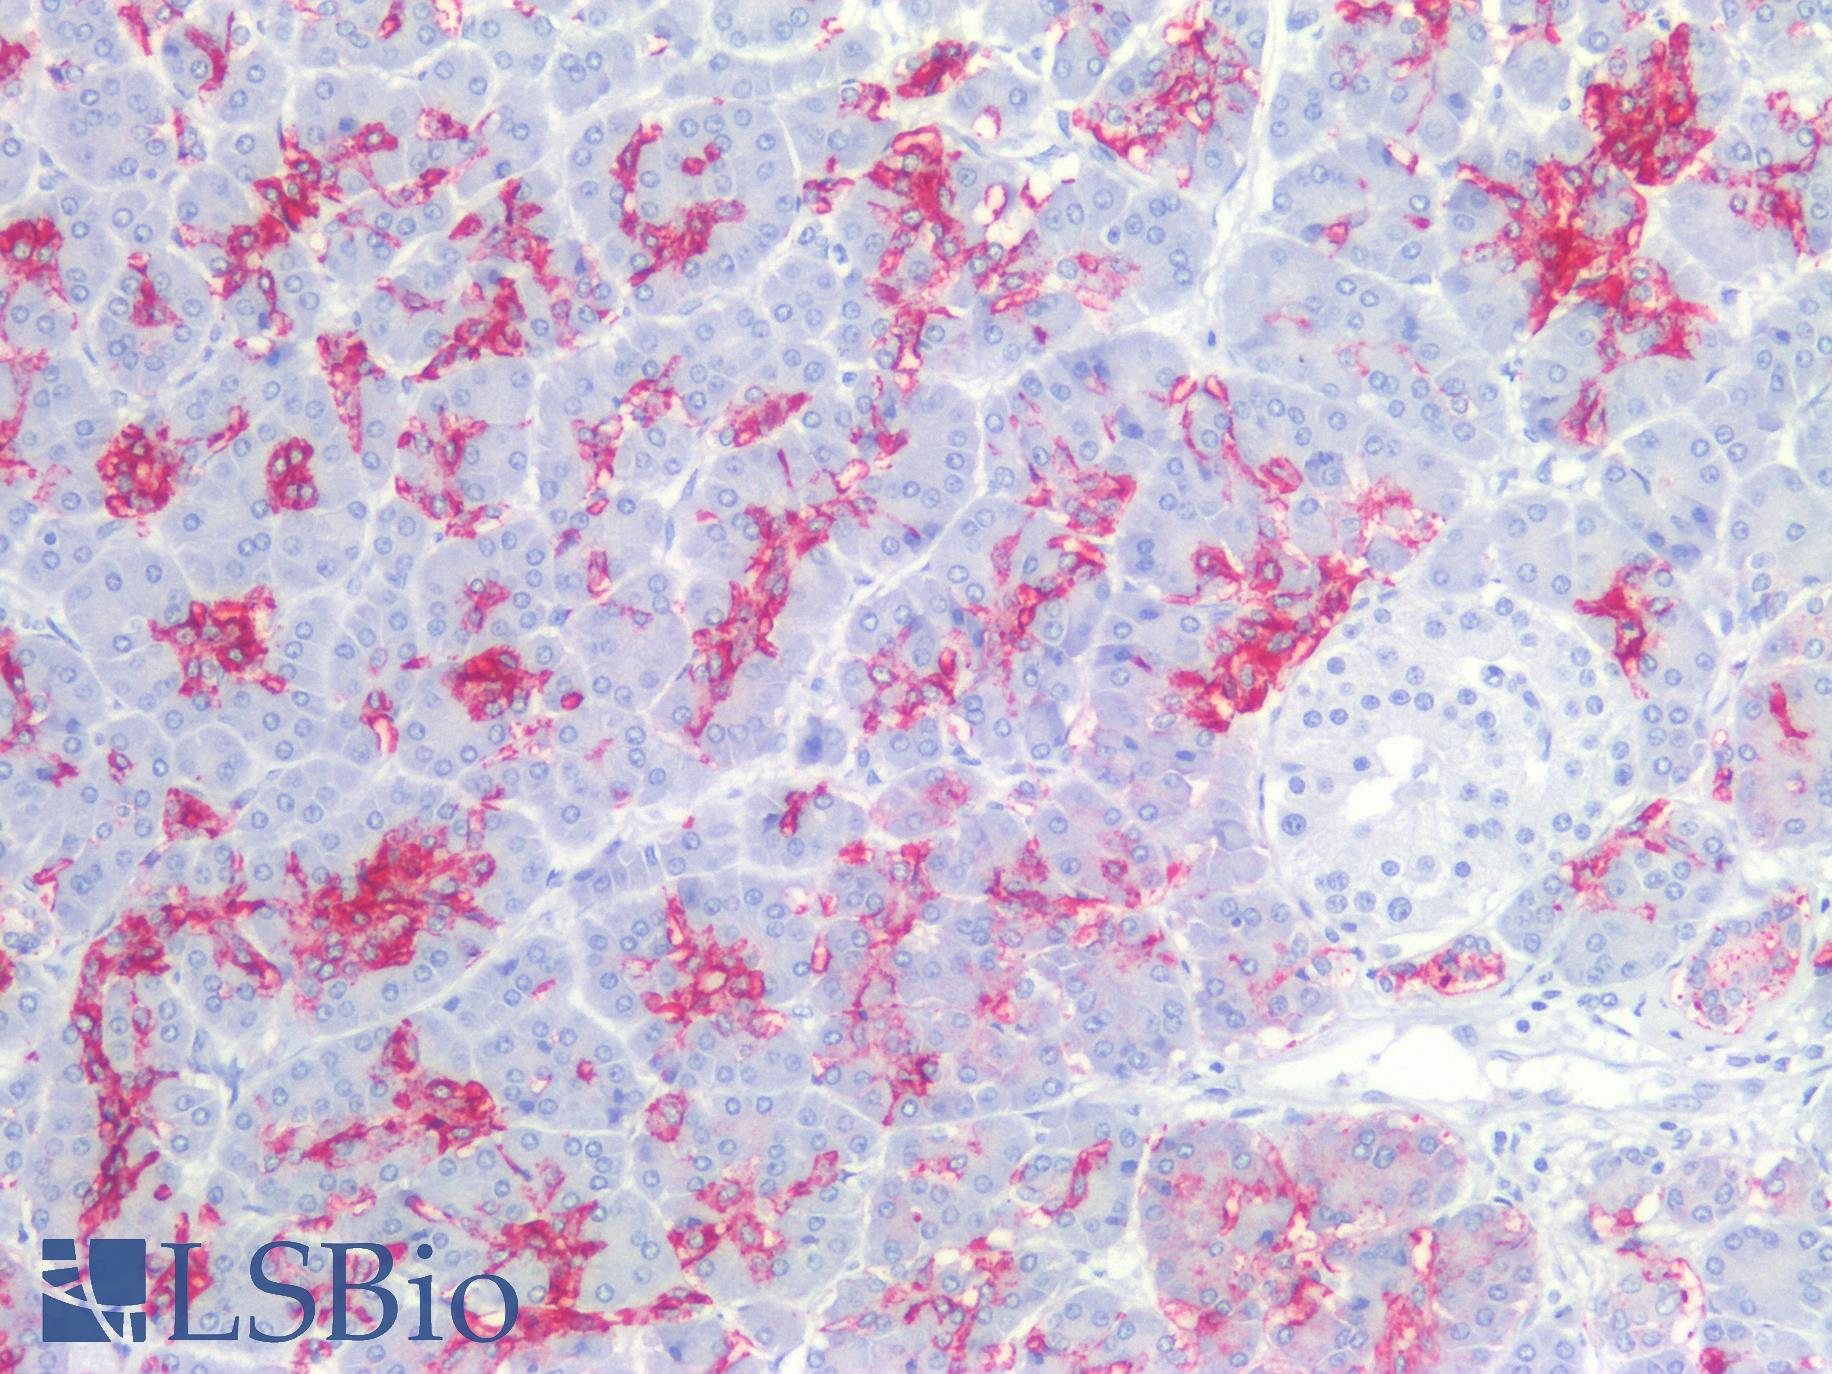 Sialylated Lewis a / CA 19-9 Antibody - Human Pancreas: Formalin-Fixed, Paraffin-Embedded (FFPE)